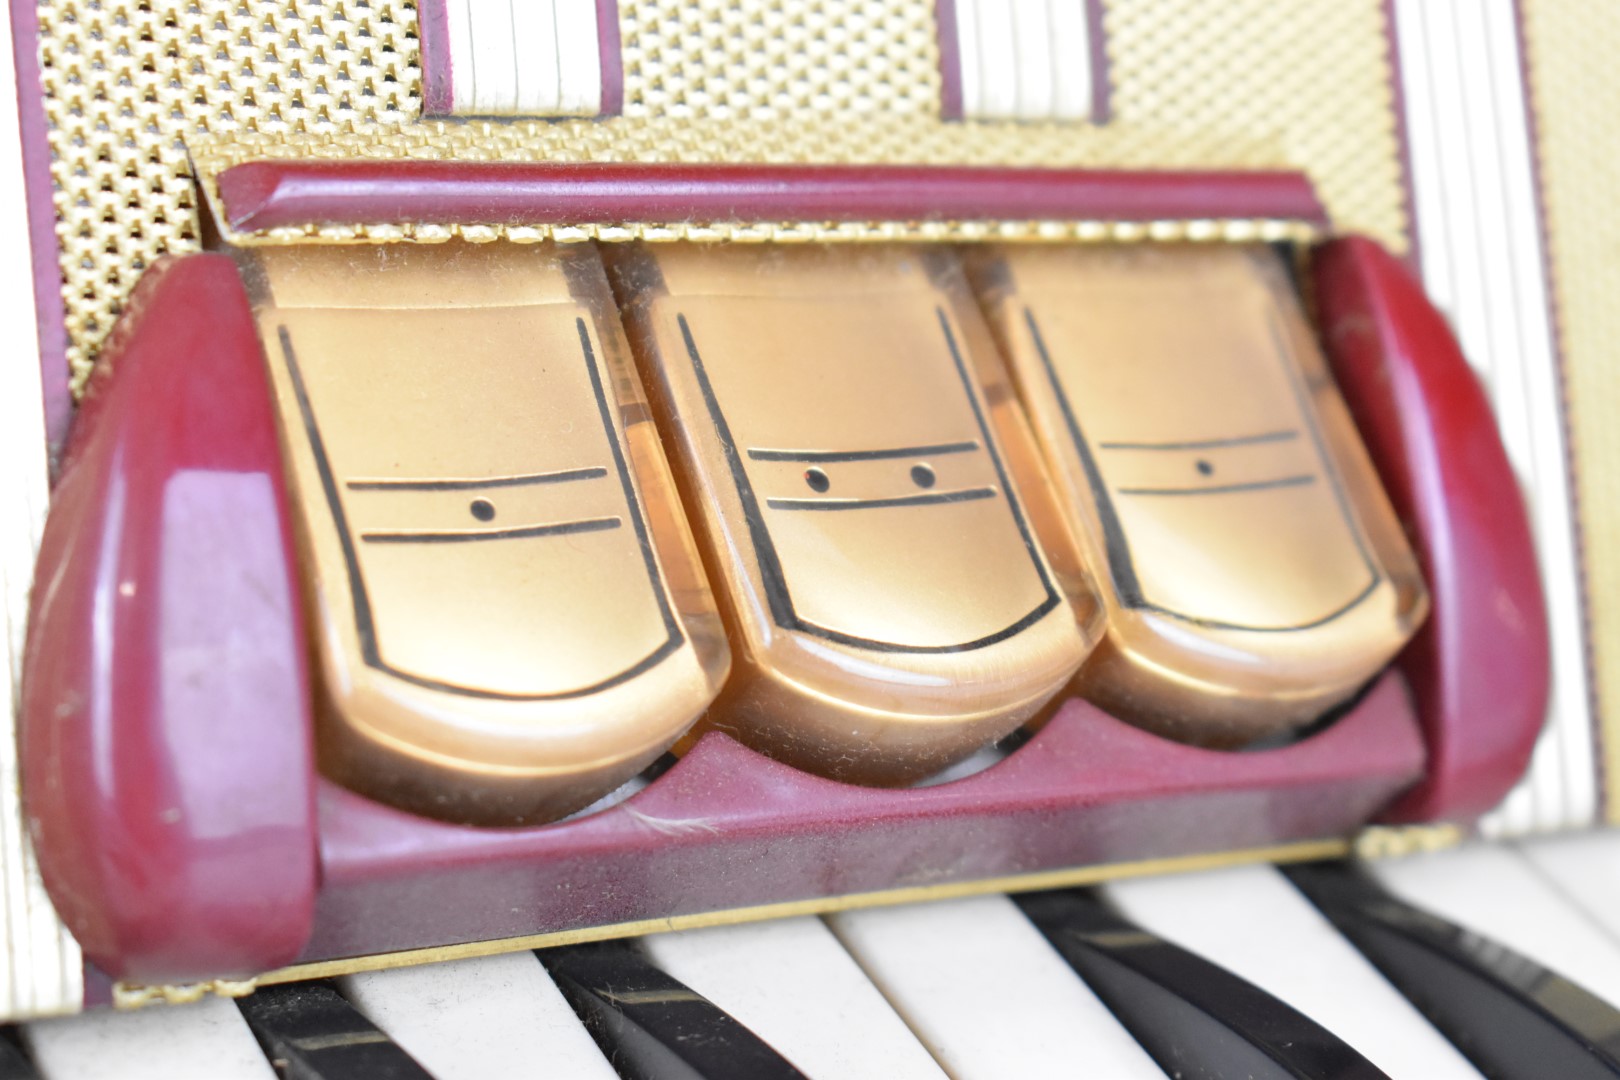 Hohner Arietta IM 36 key piano accordion in red and gold, with leather strap and hard carry case. - Image 5 of 9